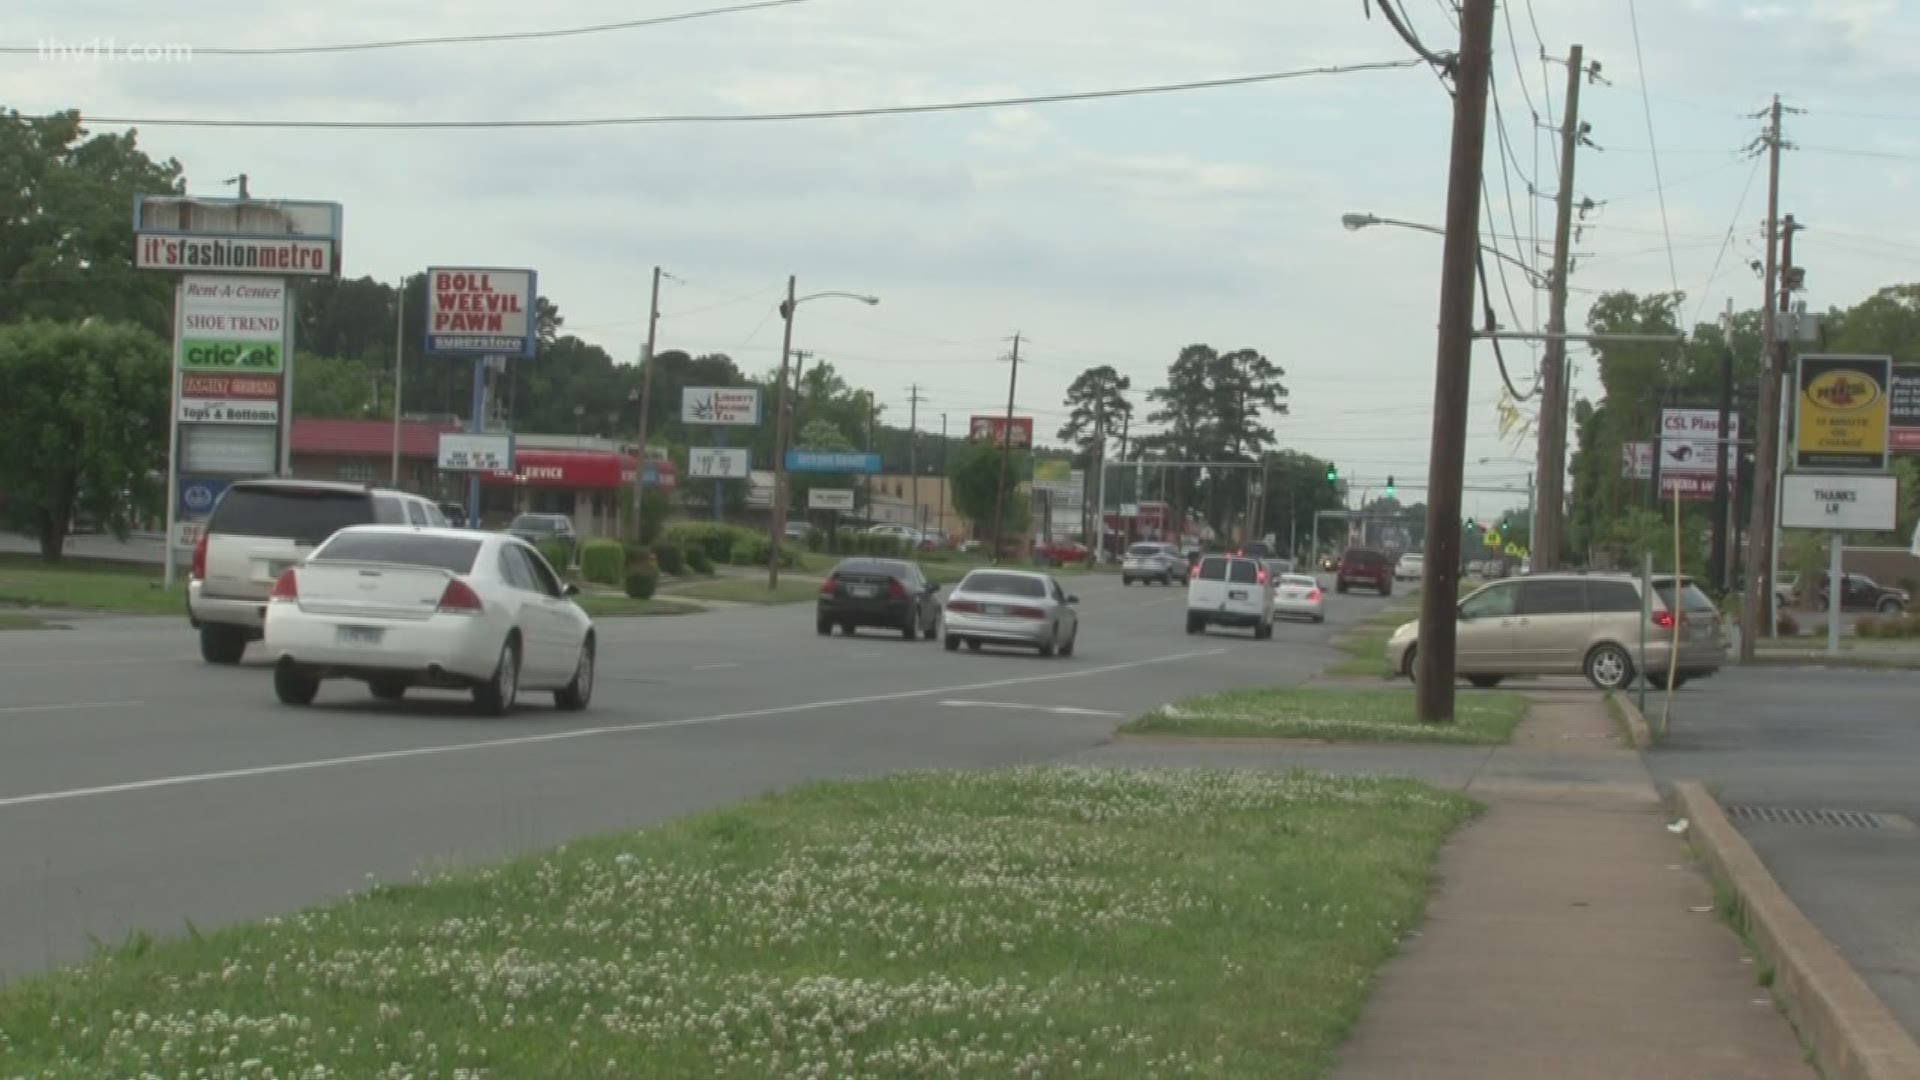 Southwest Little Rock is one of the most highly populated parts of the city and it's also often linked to crime.